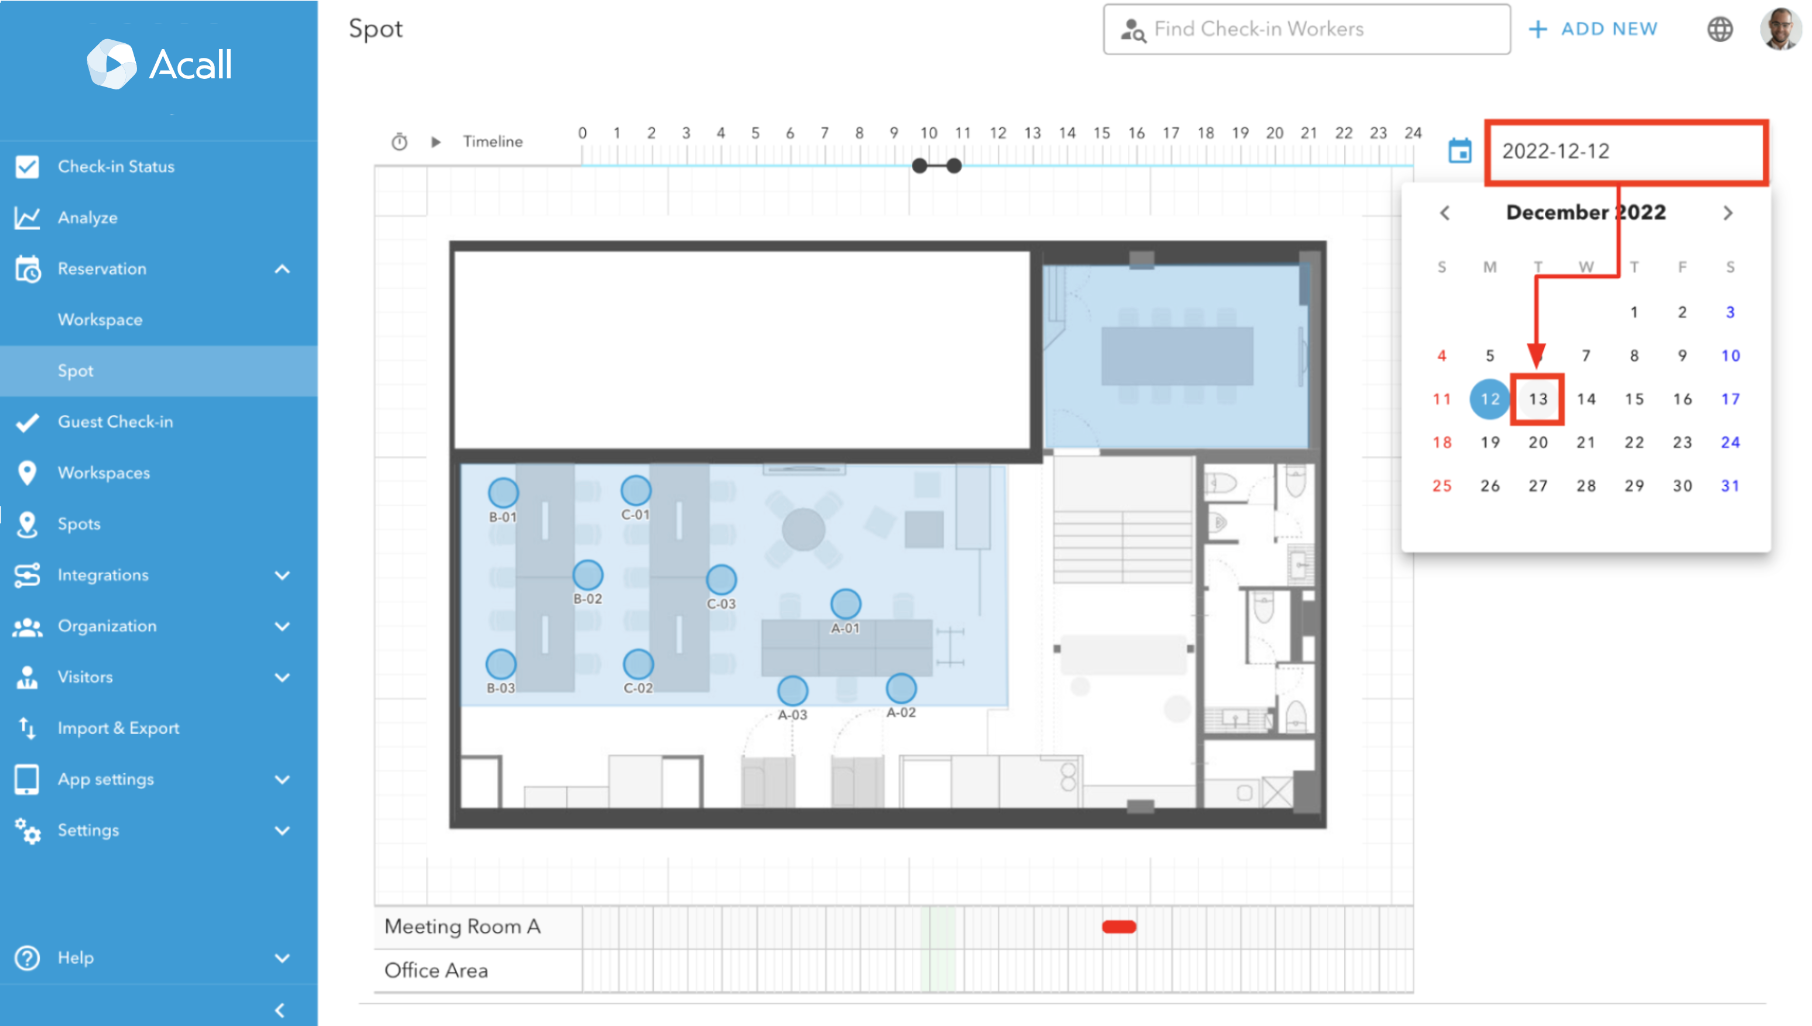 Reserve Your Spot on Floor Map on Acall Portal3.png